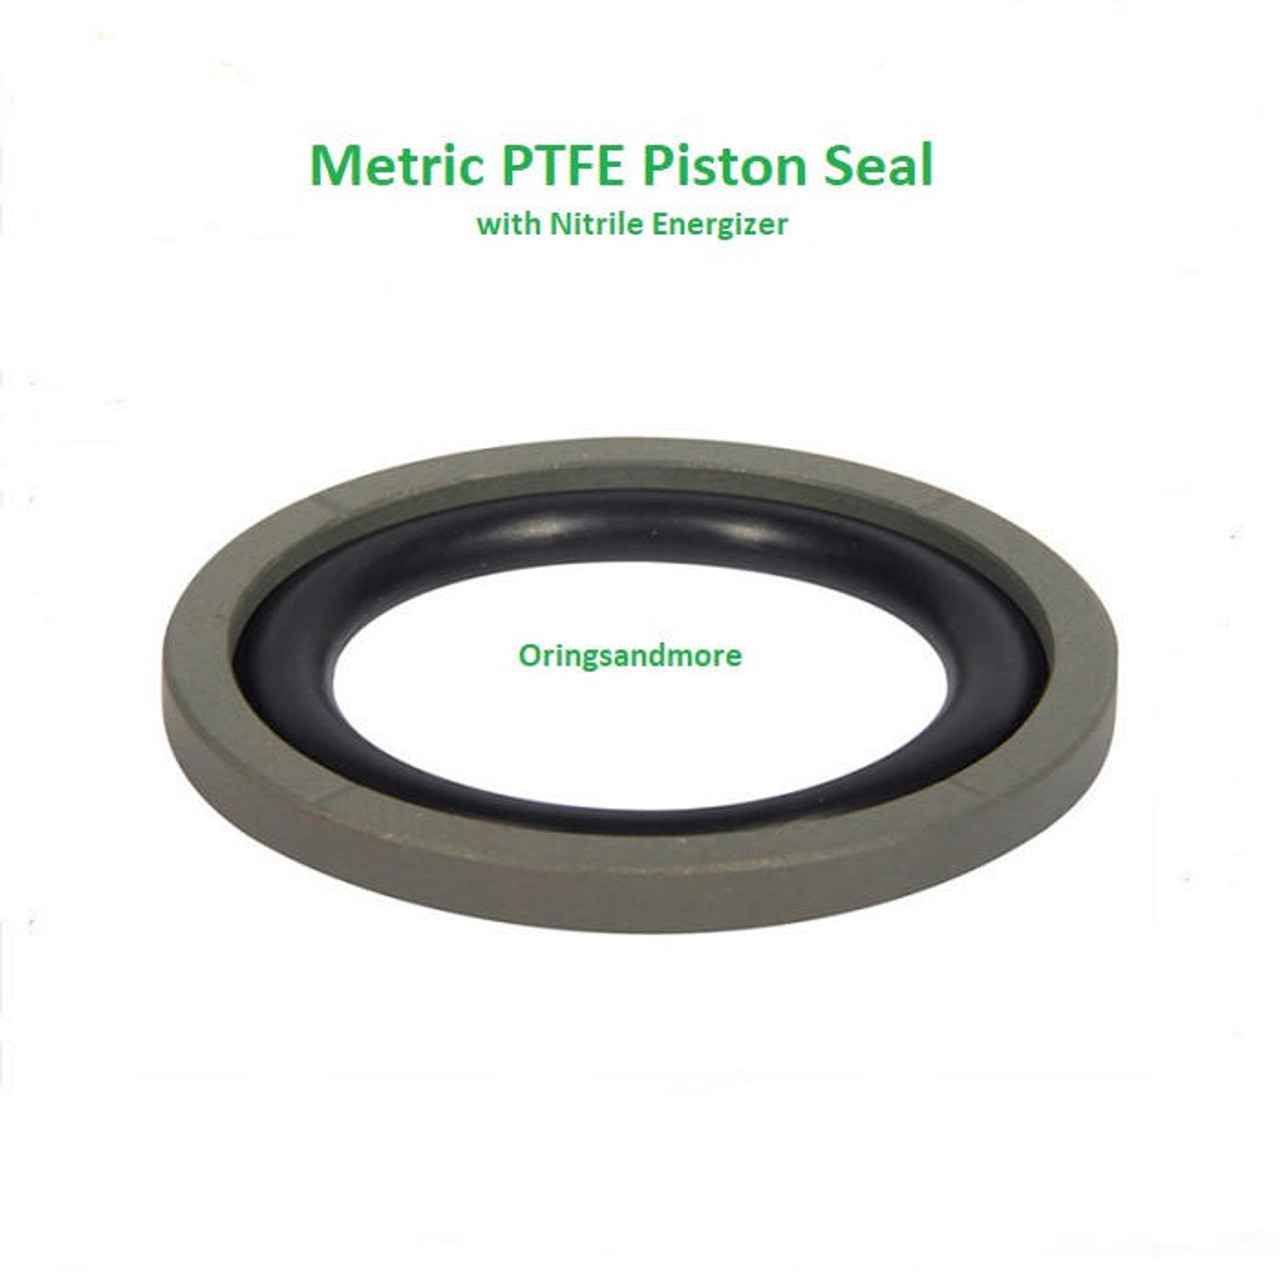 PTFE Piston Seal 115mm OD x 94mm ID x 8.1mm   Price for 1 pc